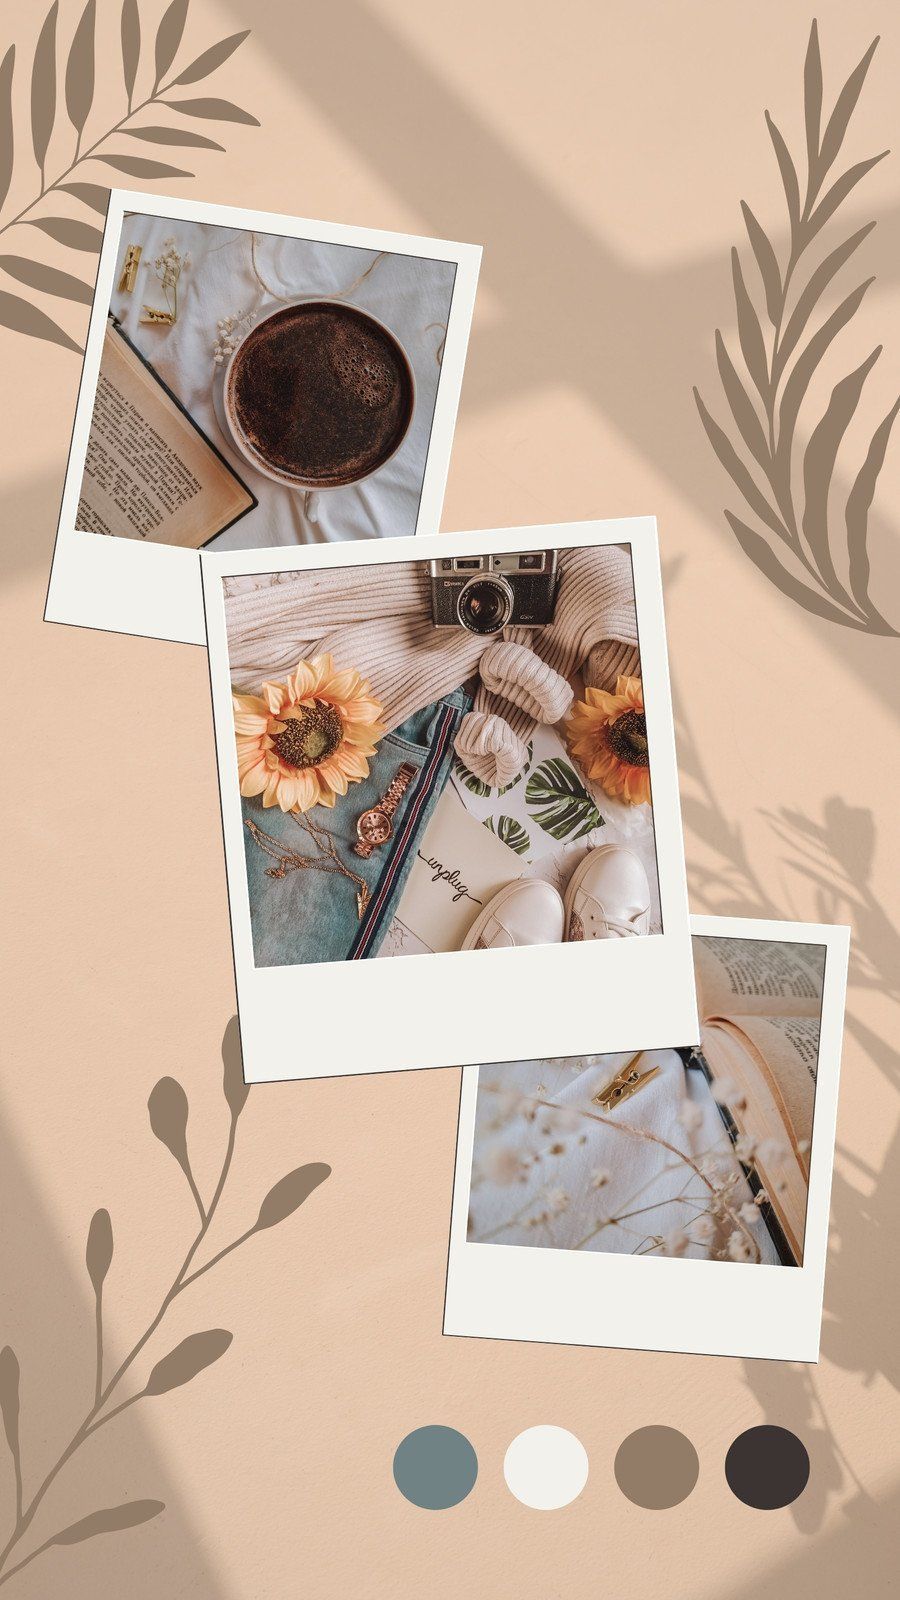 A collage of three polaroid pictures of a book, coffee, and flowers. - Phone, Android, paper, beige, photography